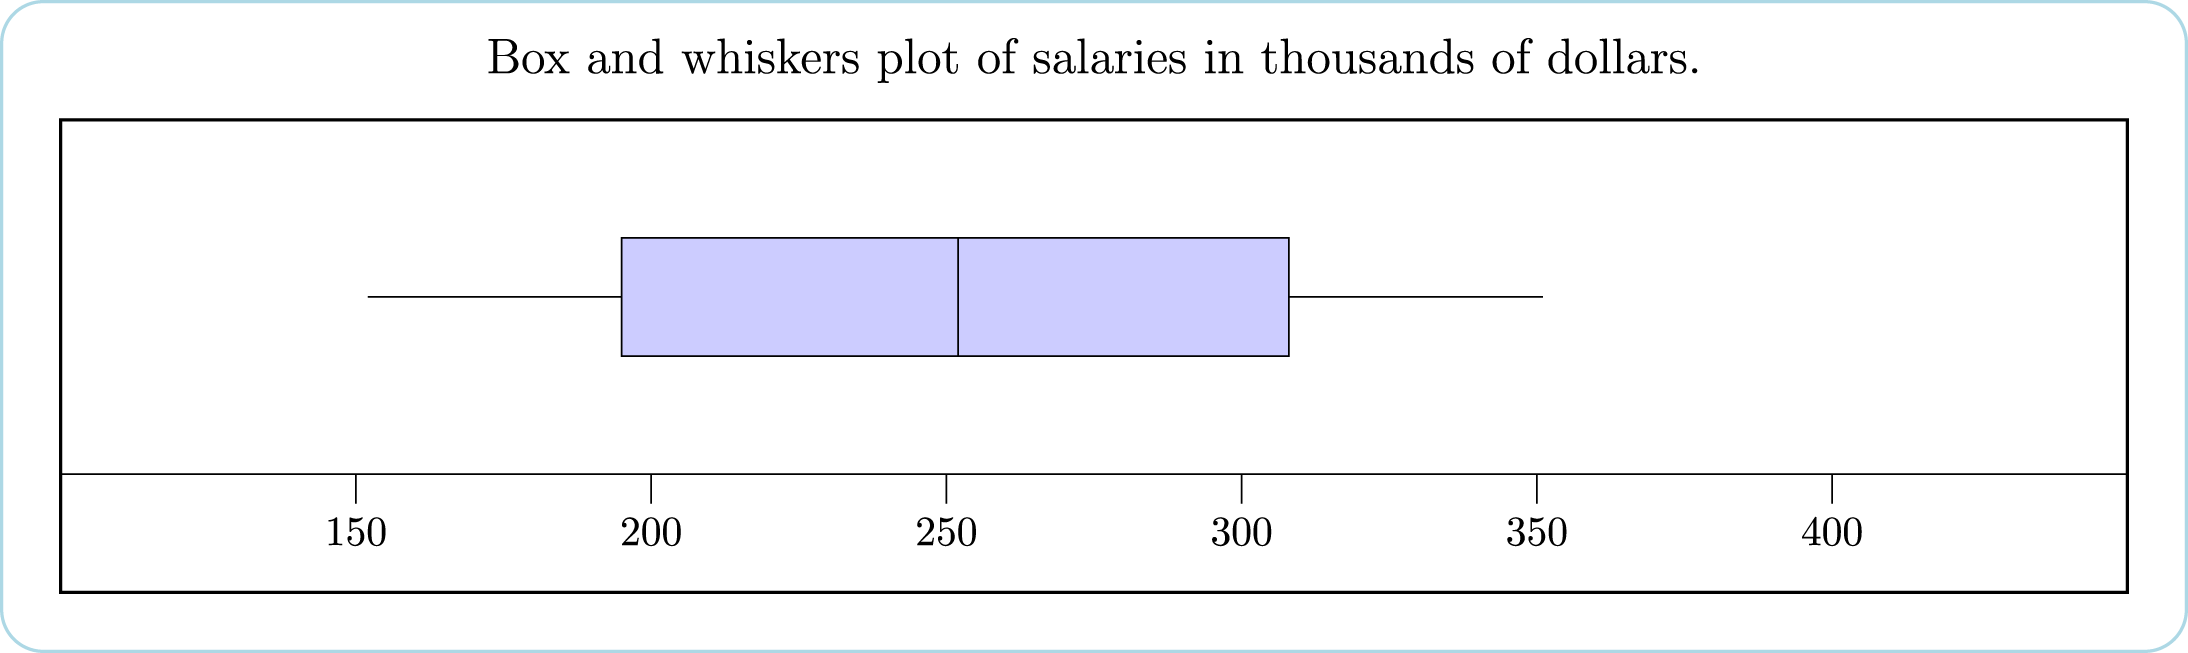 Box and whiskers plot for salaries listed in thousands of dollars. The left whisker is from 152 to 195. The box is between 195 and 308. The middle line is at 252 and the right whisker runs from 308 to 351